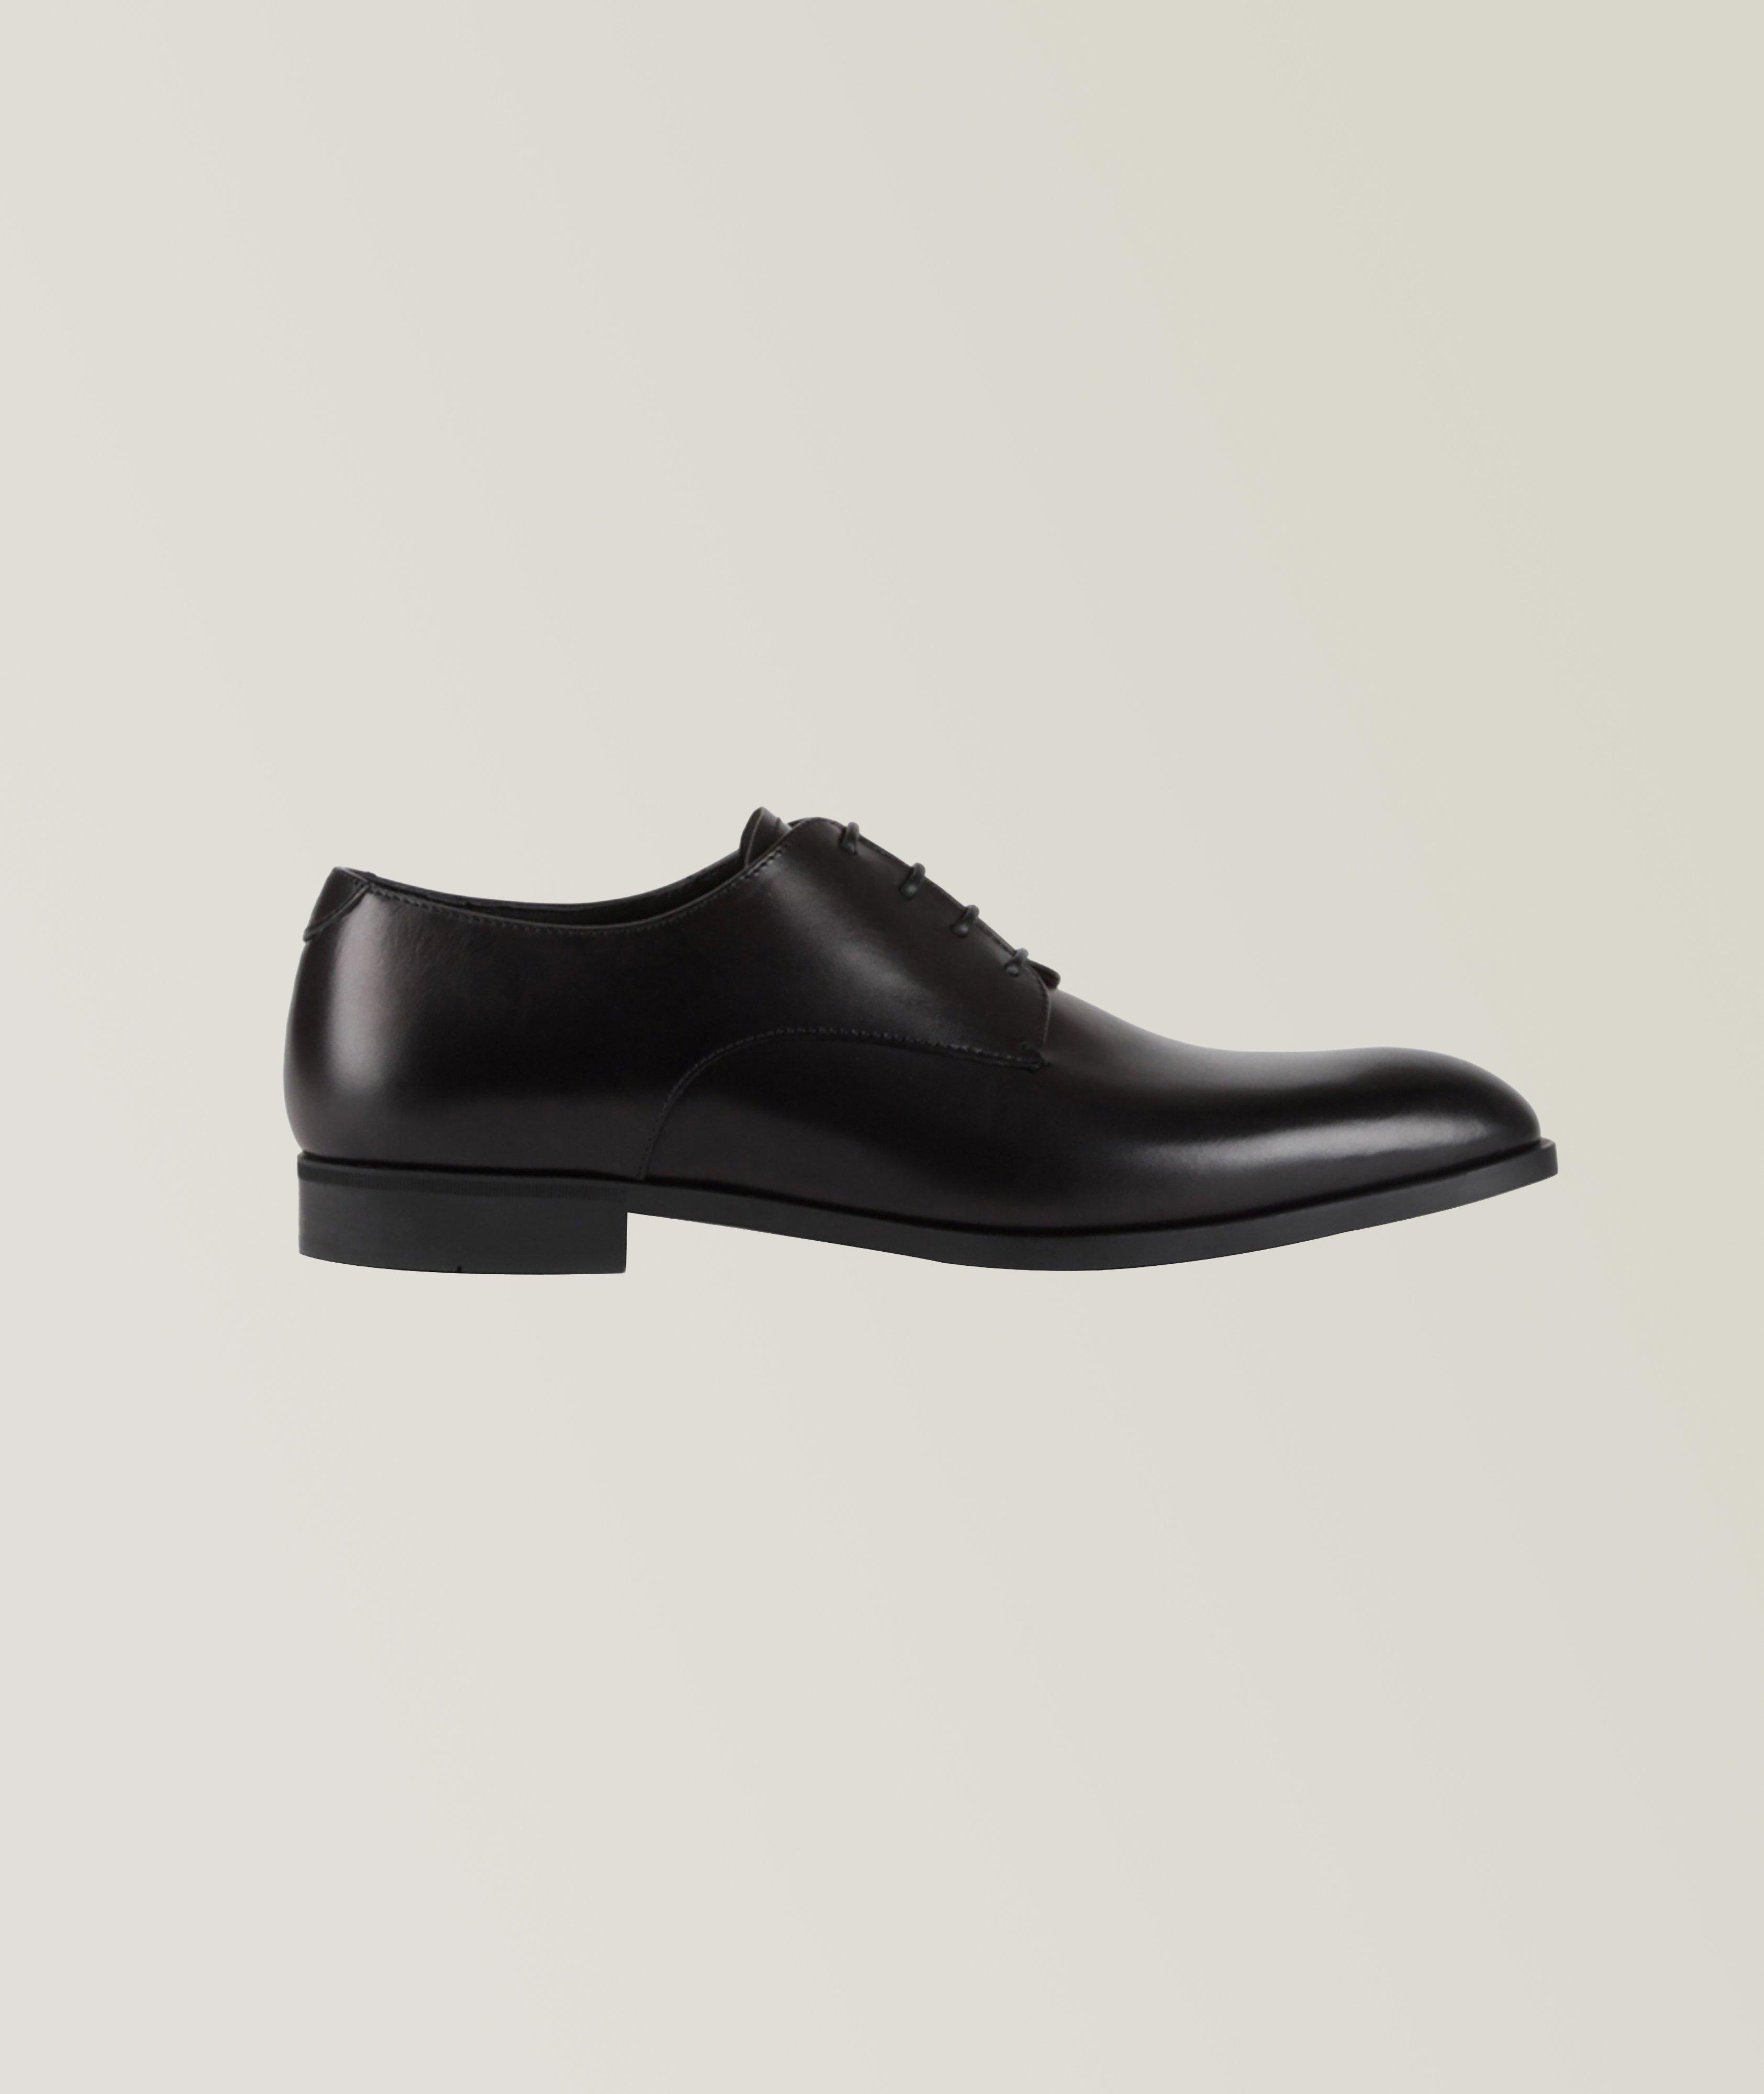 Formal Lace-Up Shoes image 0